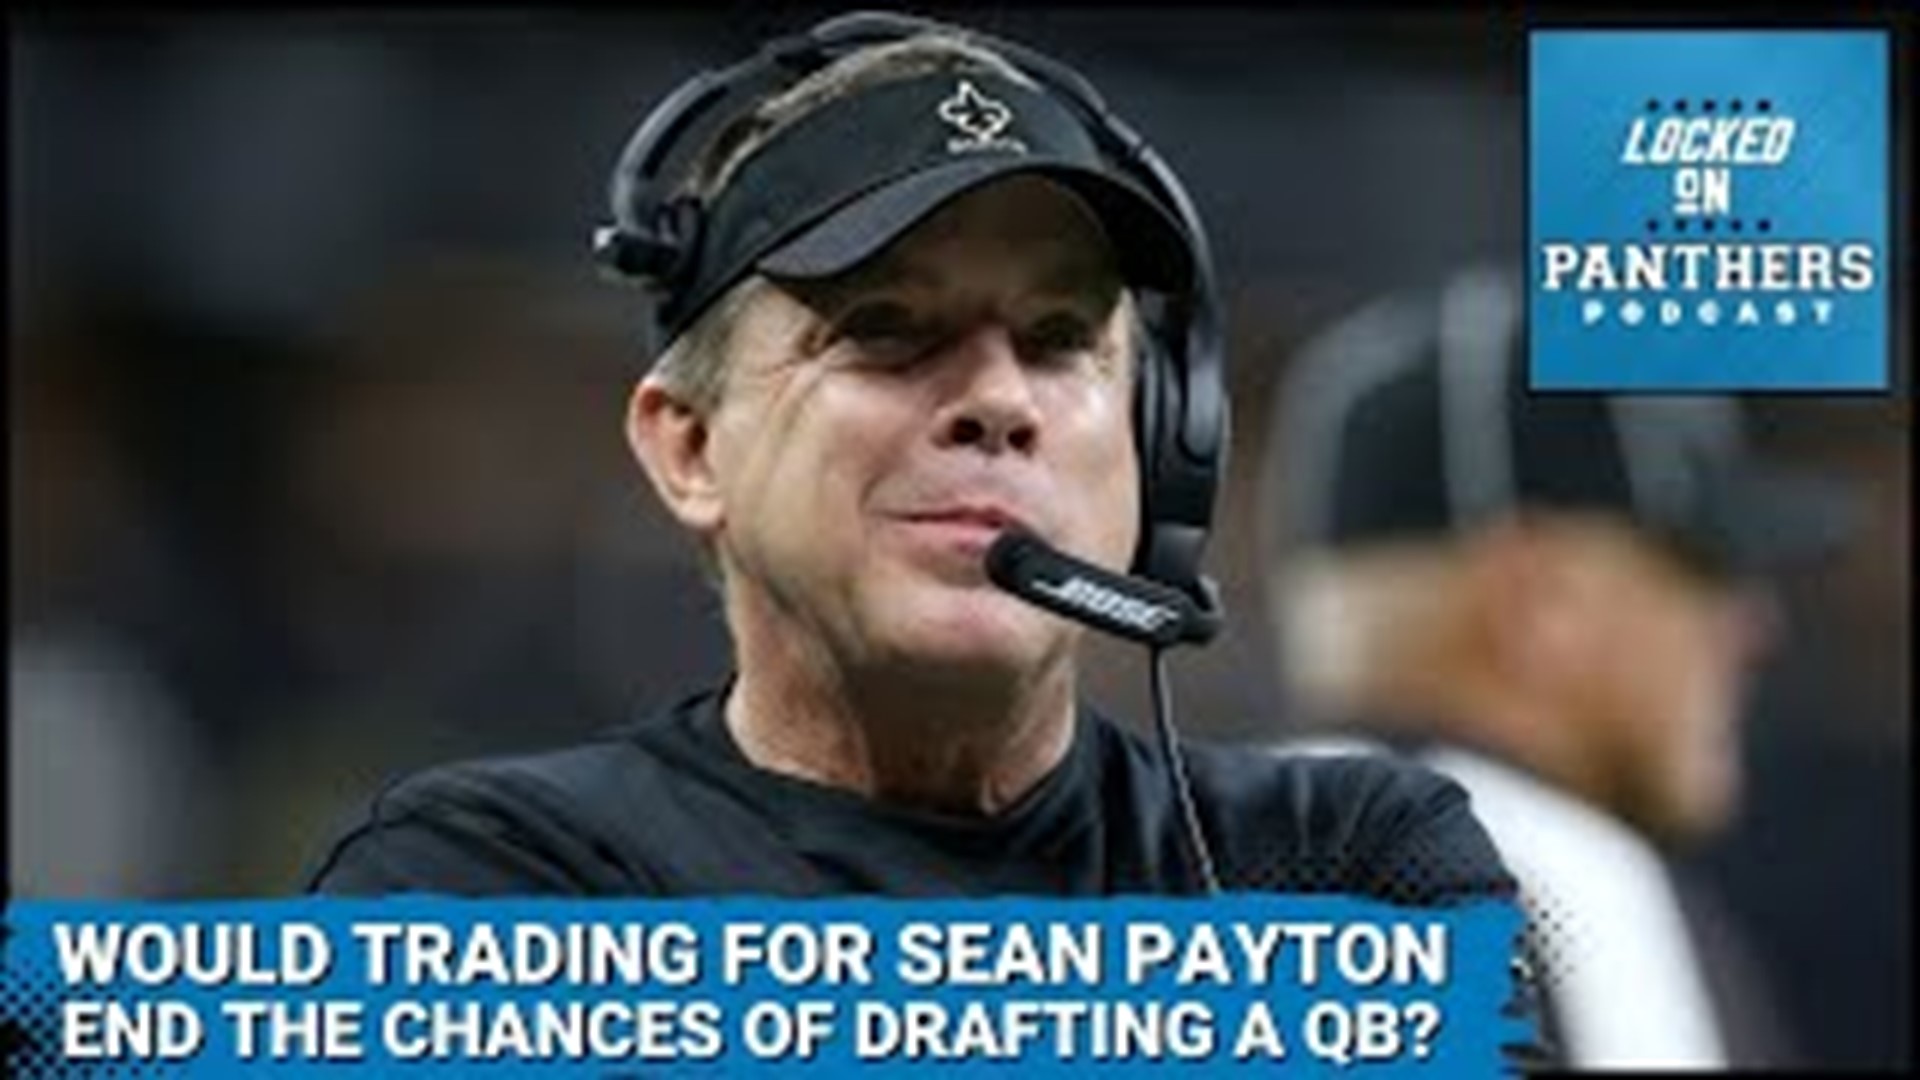 Sean Payton would come with a hefty price tag, including draft picks. Would this hurt the team's ability to build for the future? That and more on Locked On Panthers